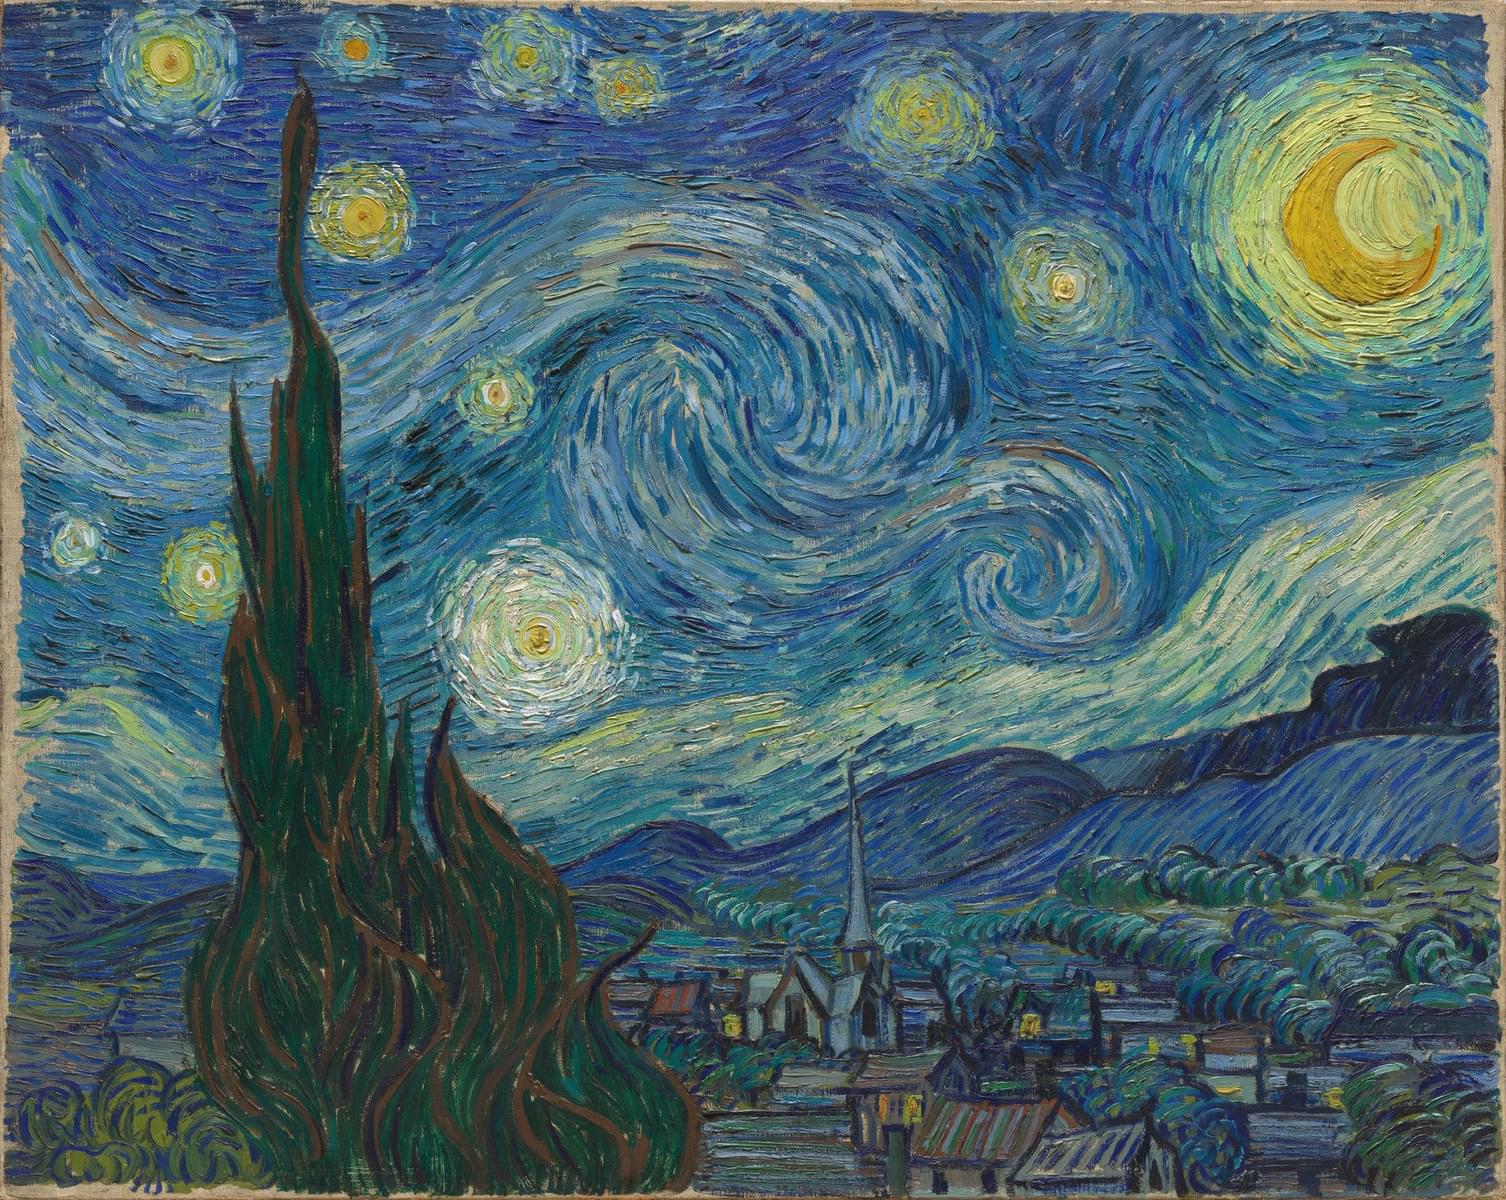 The Starry Night by Vincent Van Gogh